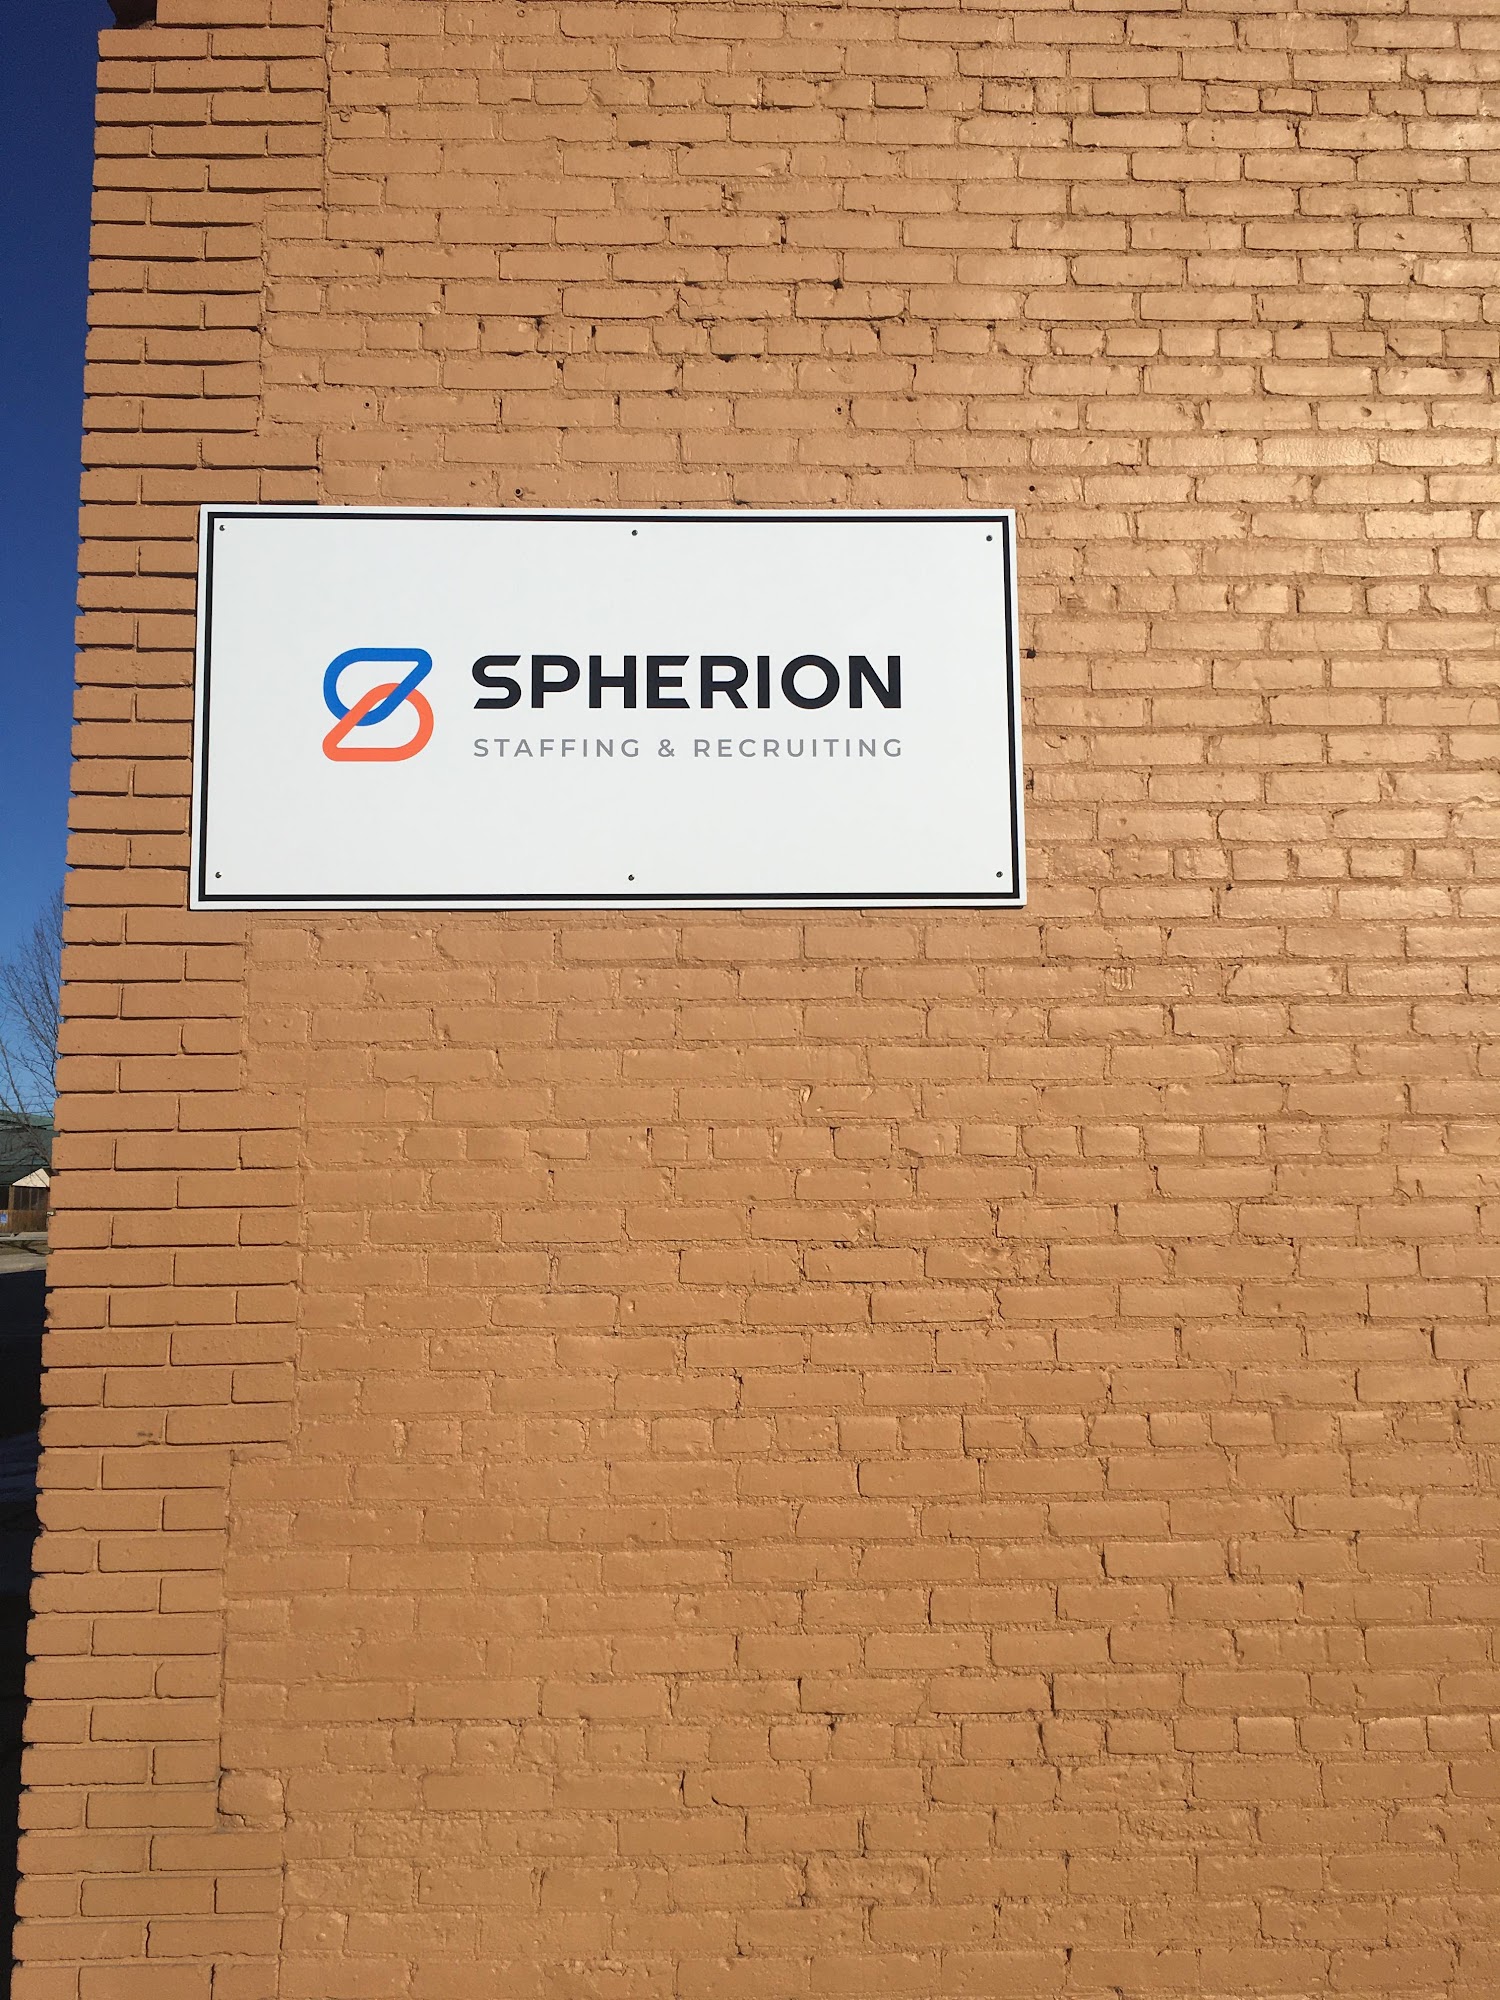 Spherion Staffing & Recruiting 323 E Spring St, St Marys Ohio 45885